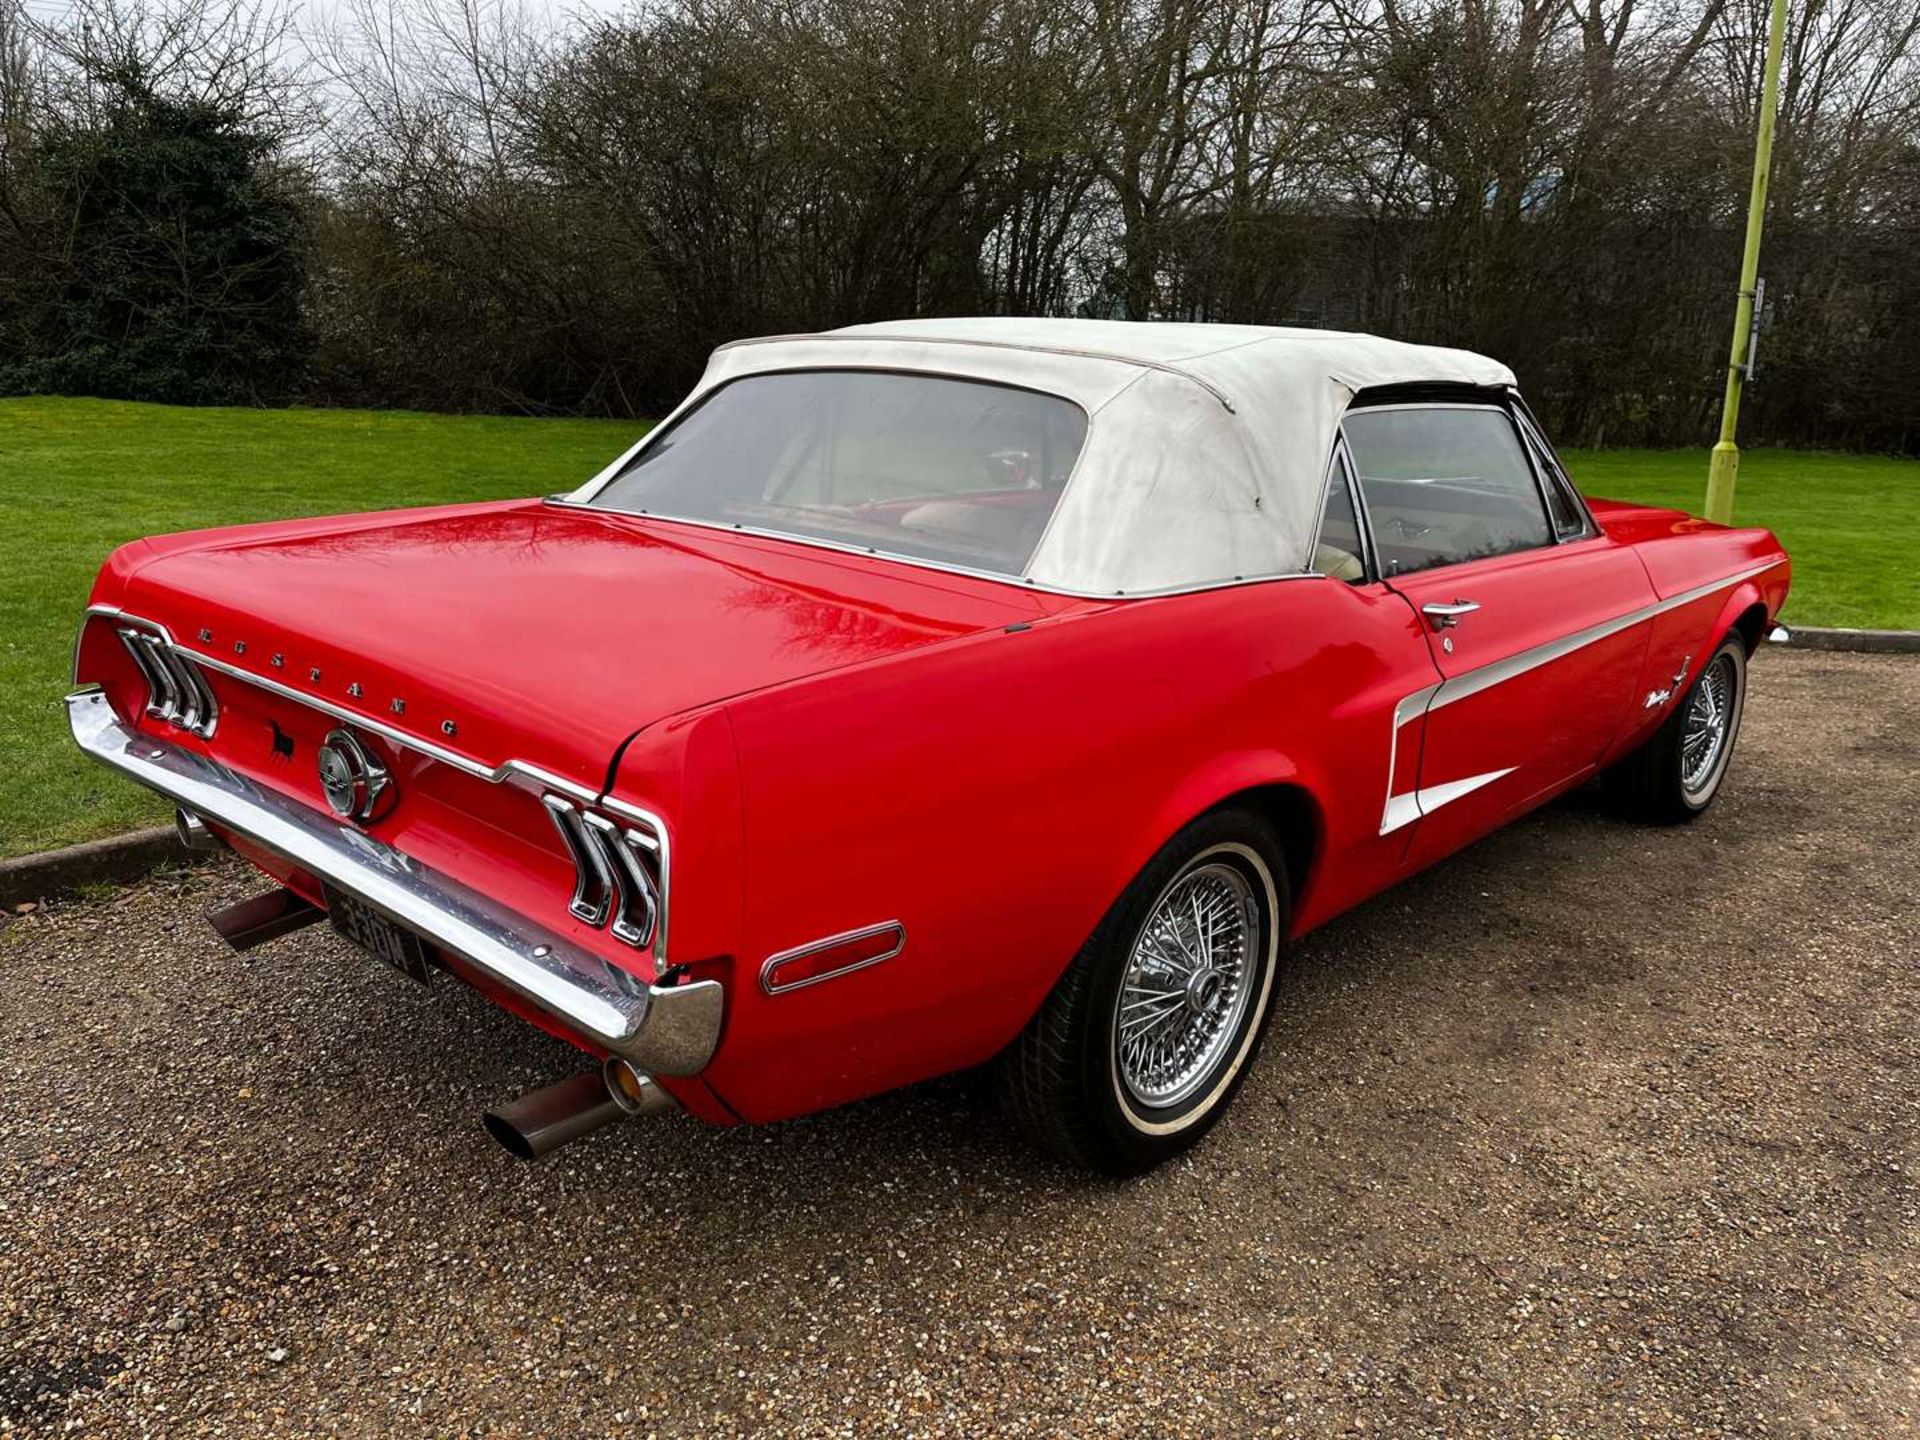 1968 FORD MUSTANG 4.7 V8 AUTO CONVERTIBLE LHD - Image 10 of 30